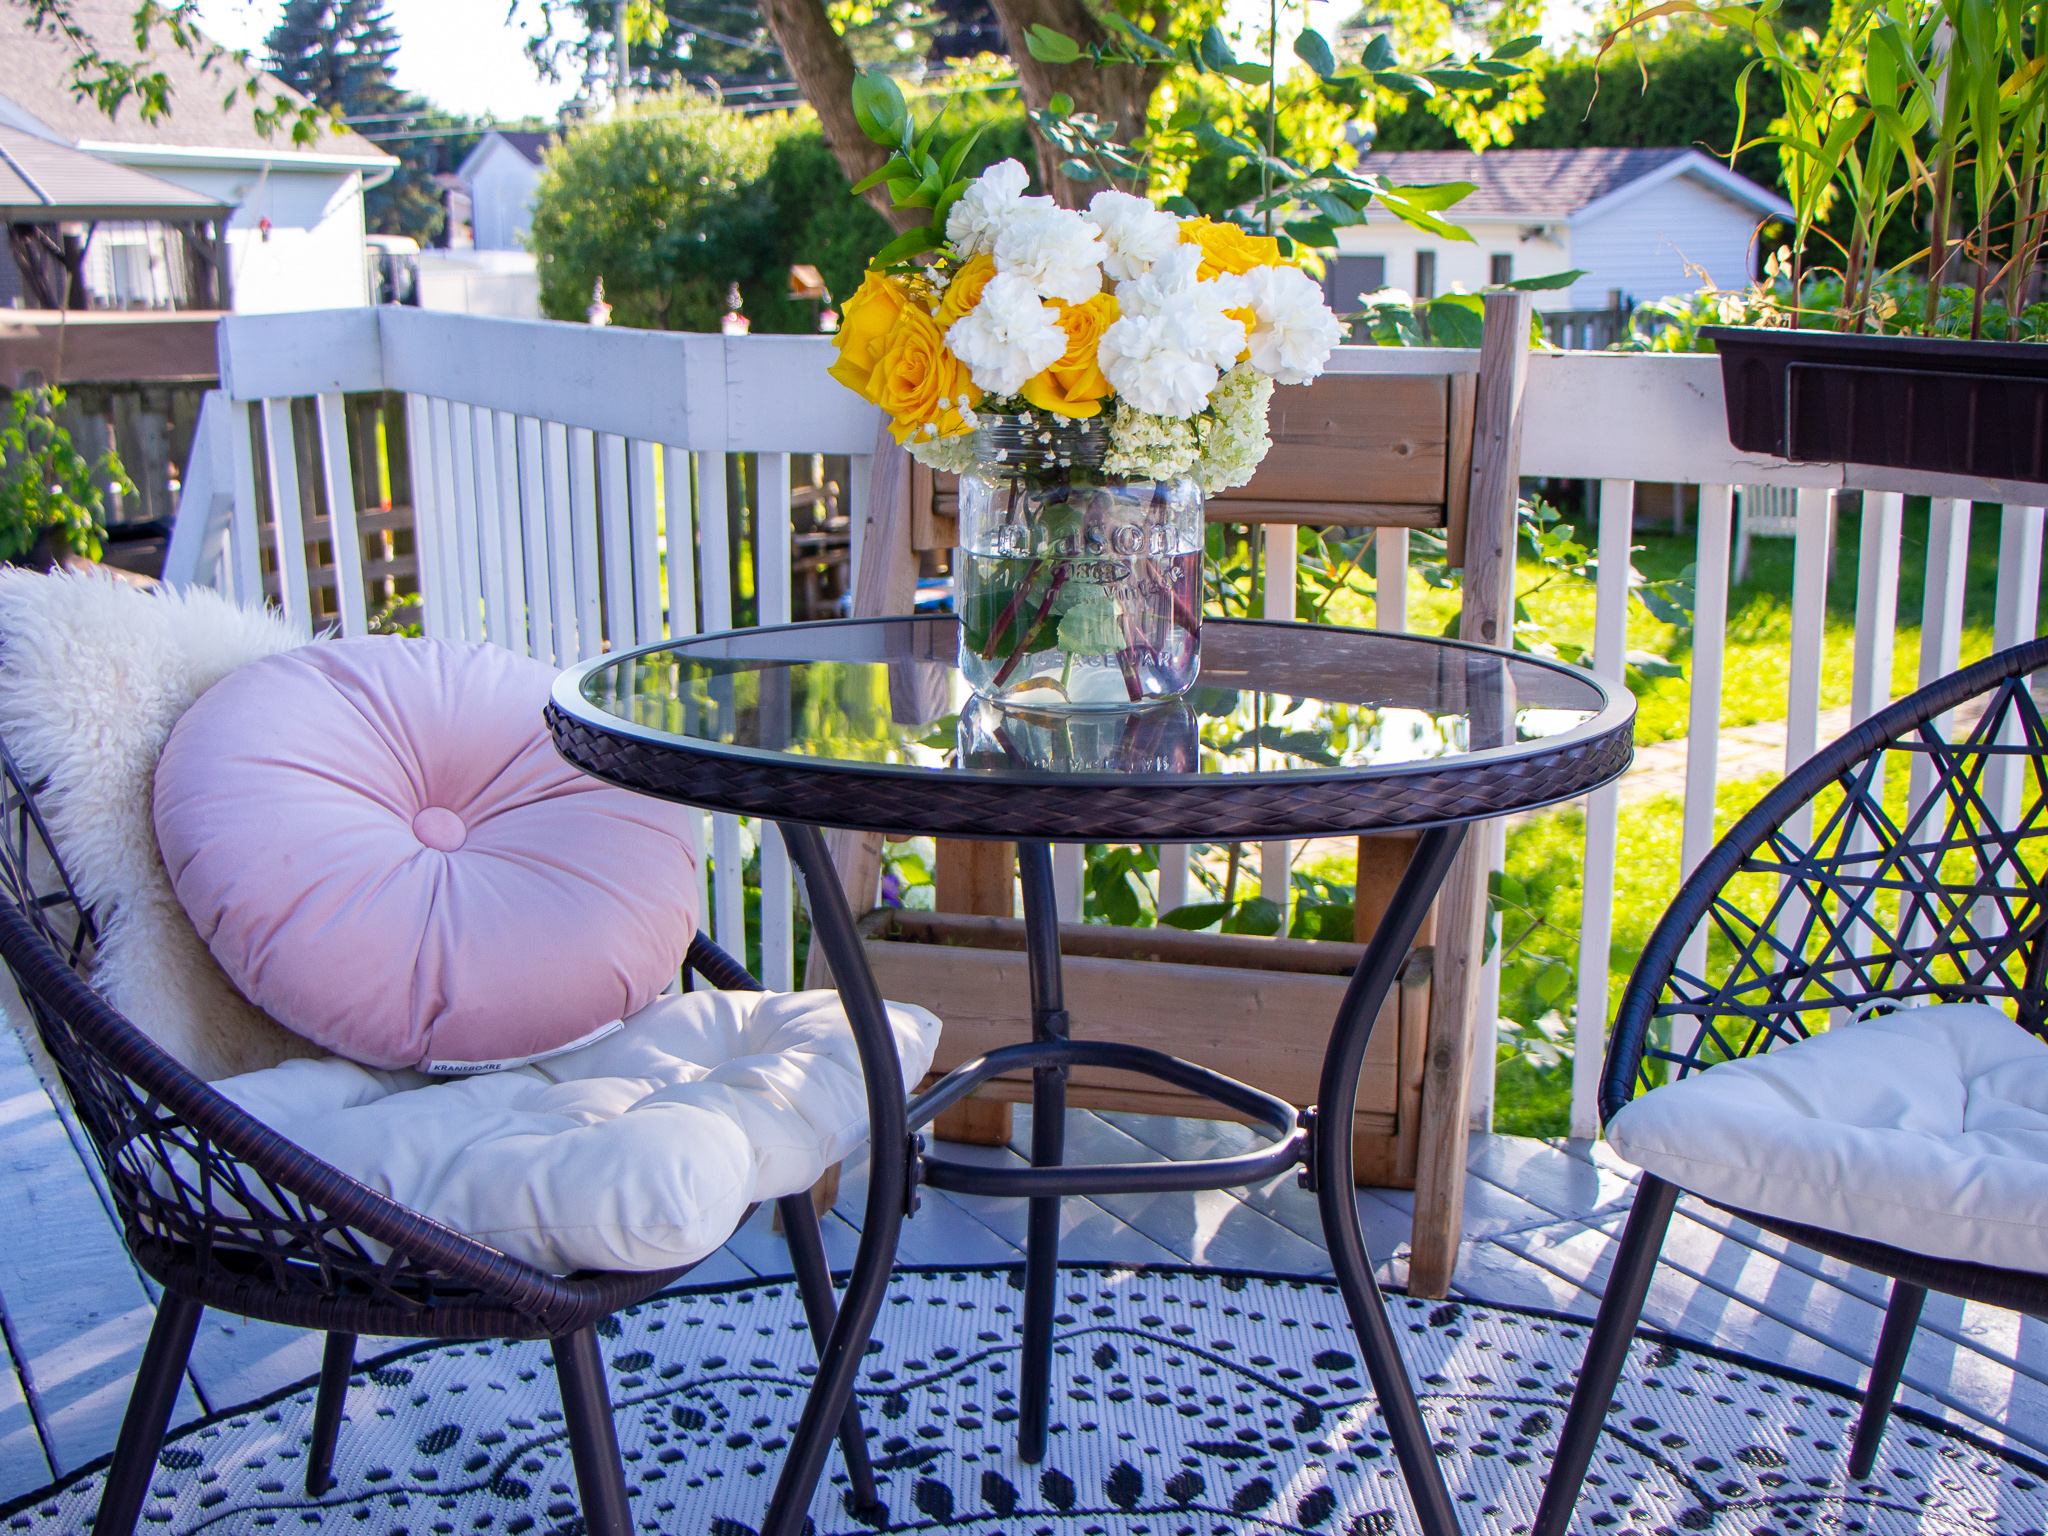 Patio furniture for the summer